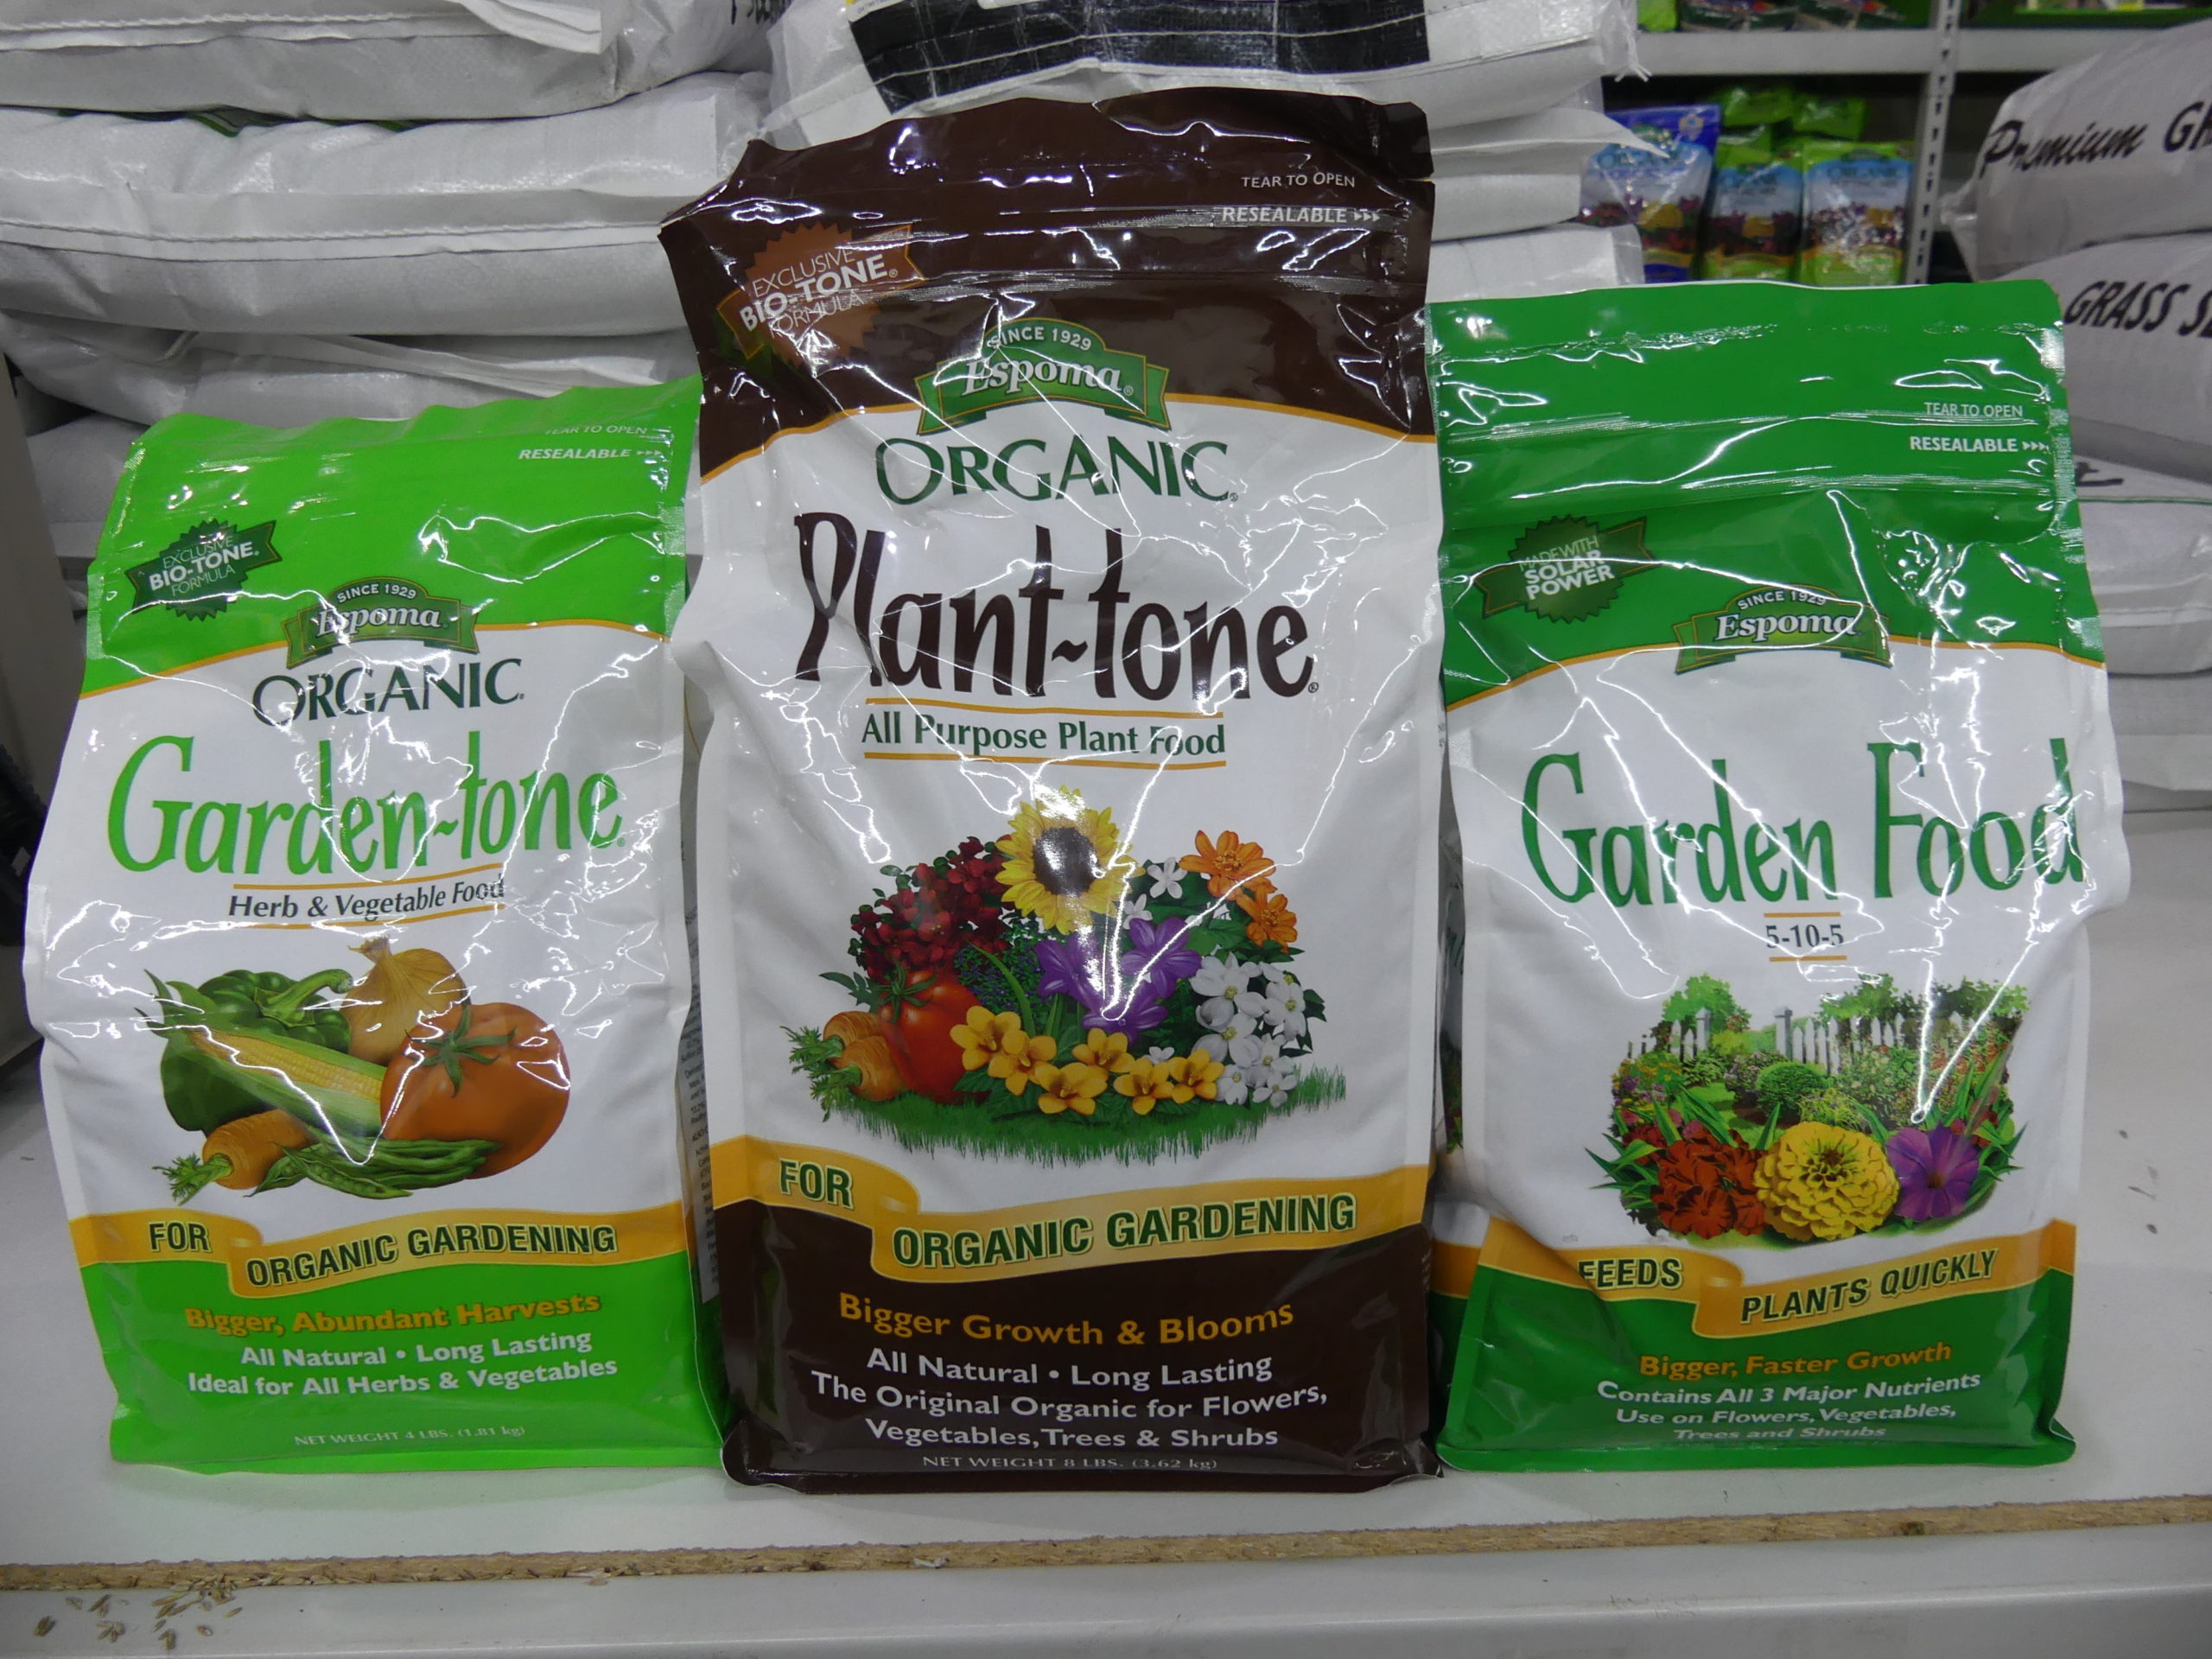 Most gardeners are familiar with the Espoma brand of organics such as the Garden-tone on the left and the Plant-tone in the middle. However, Espoma also sells chemical fertilizers such as the “Garden Food” 5-10-5 on the left. All organic Espoma products say just that, “Organic.”  Choosing the wrong type of fertilizer can cause all kinds of issues if you’re not aware and know how to use the chemical types.